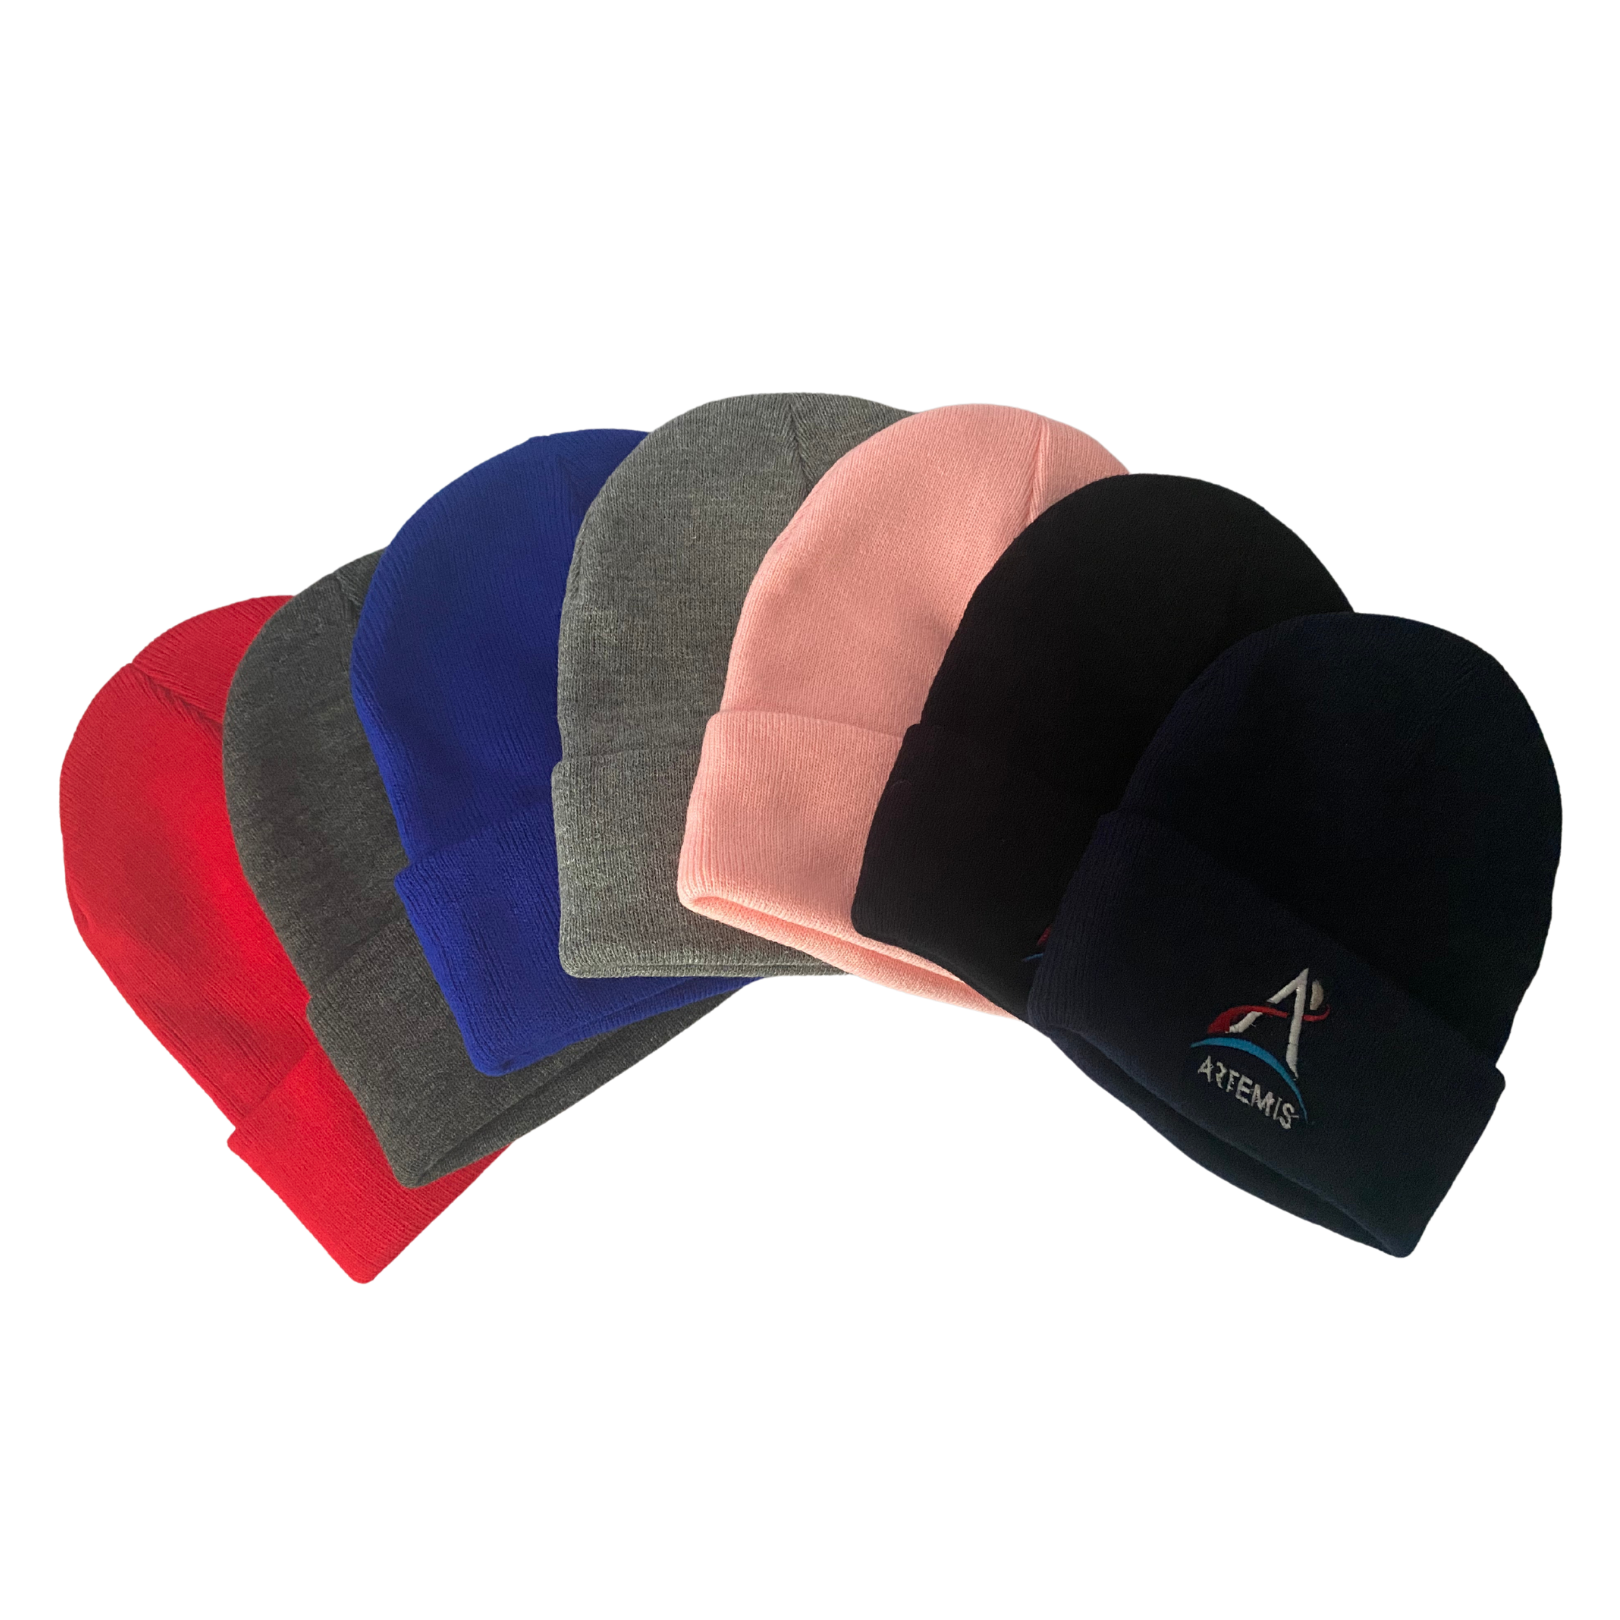 Artemis Program Logo Embroidered Beanie with Cuff - Assorted Colors